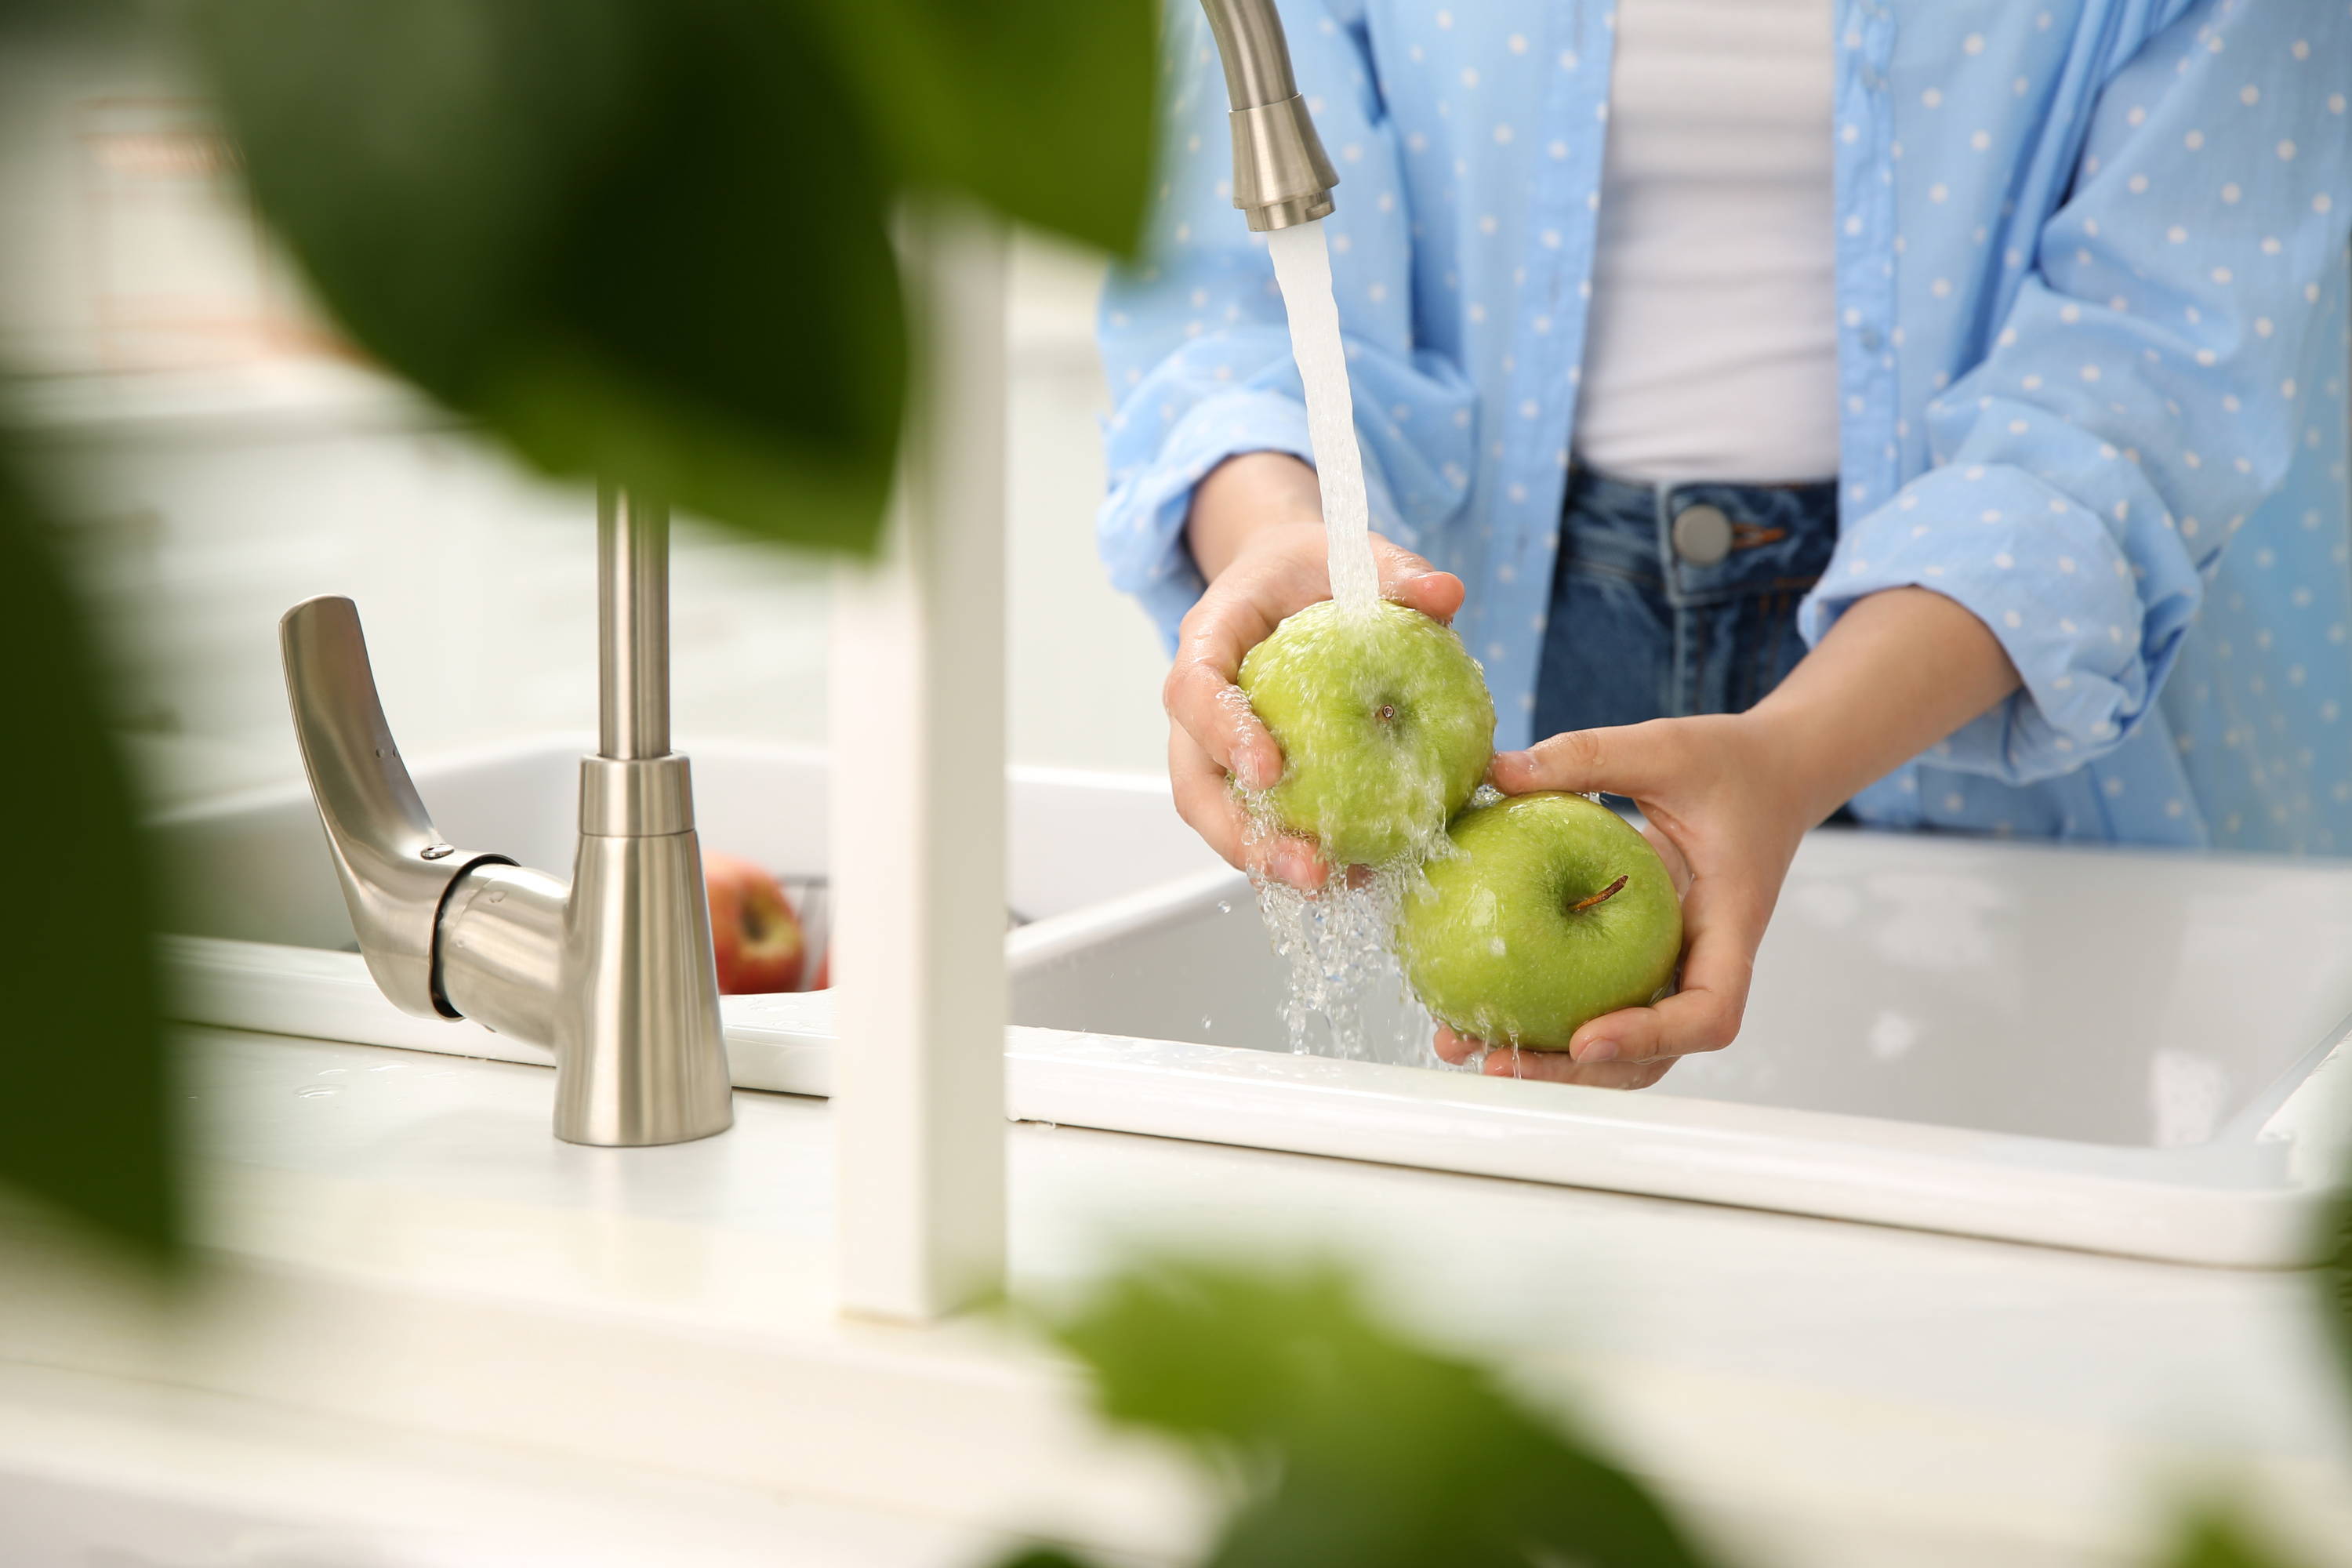 Washing apples with purified water